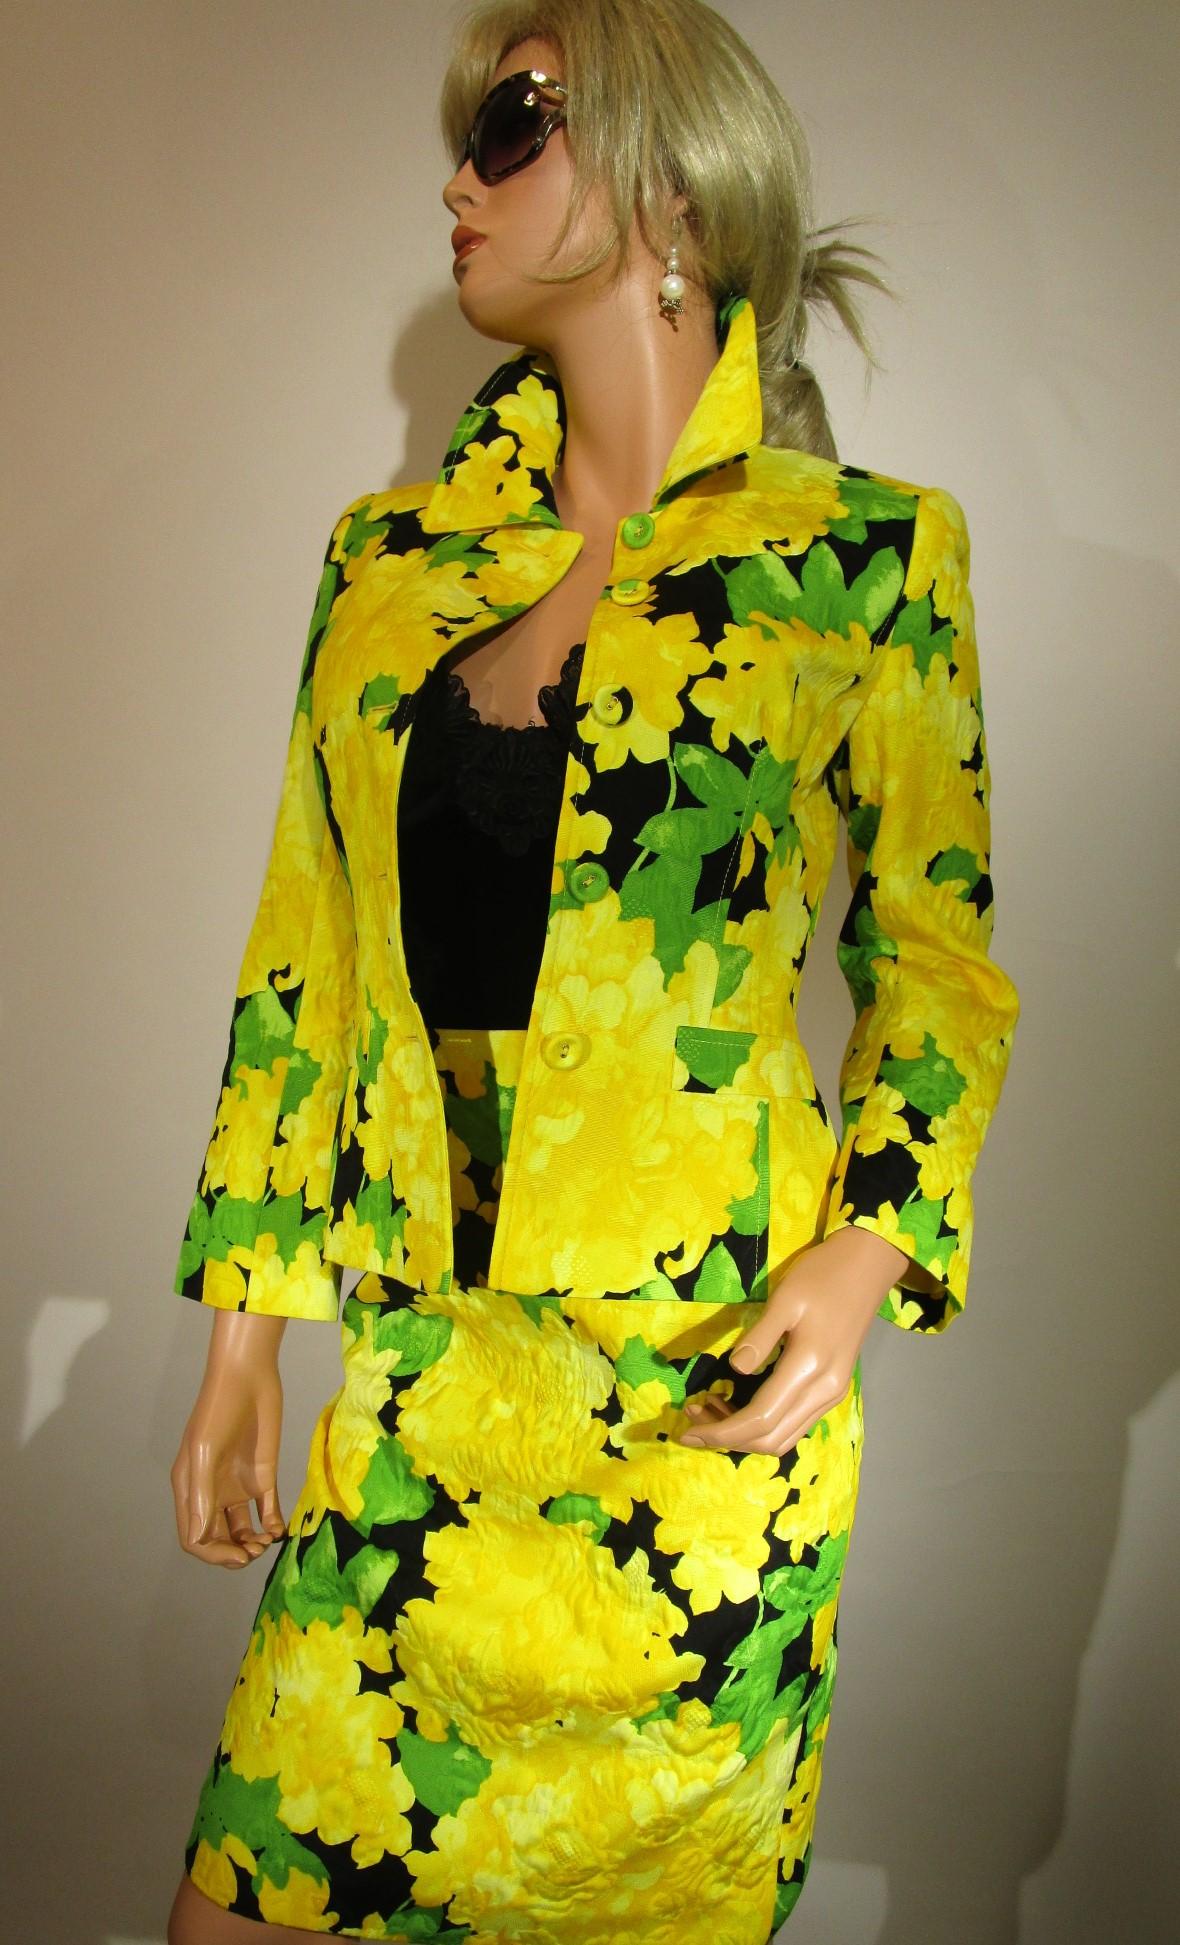 Incredible ESCADA Couture Blazer and Skirt 2-pc set.
Vibrant colors of yellow, green and black flower print with quilted design. 
Gorgeous condition!

NOTE:  Blazer is a Sz 36 & Skirt is a Sz 34
Please refer to measurements below to make sure the